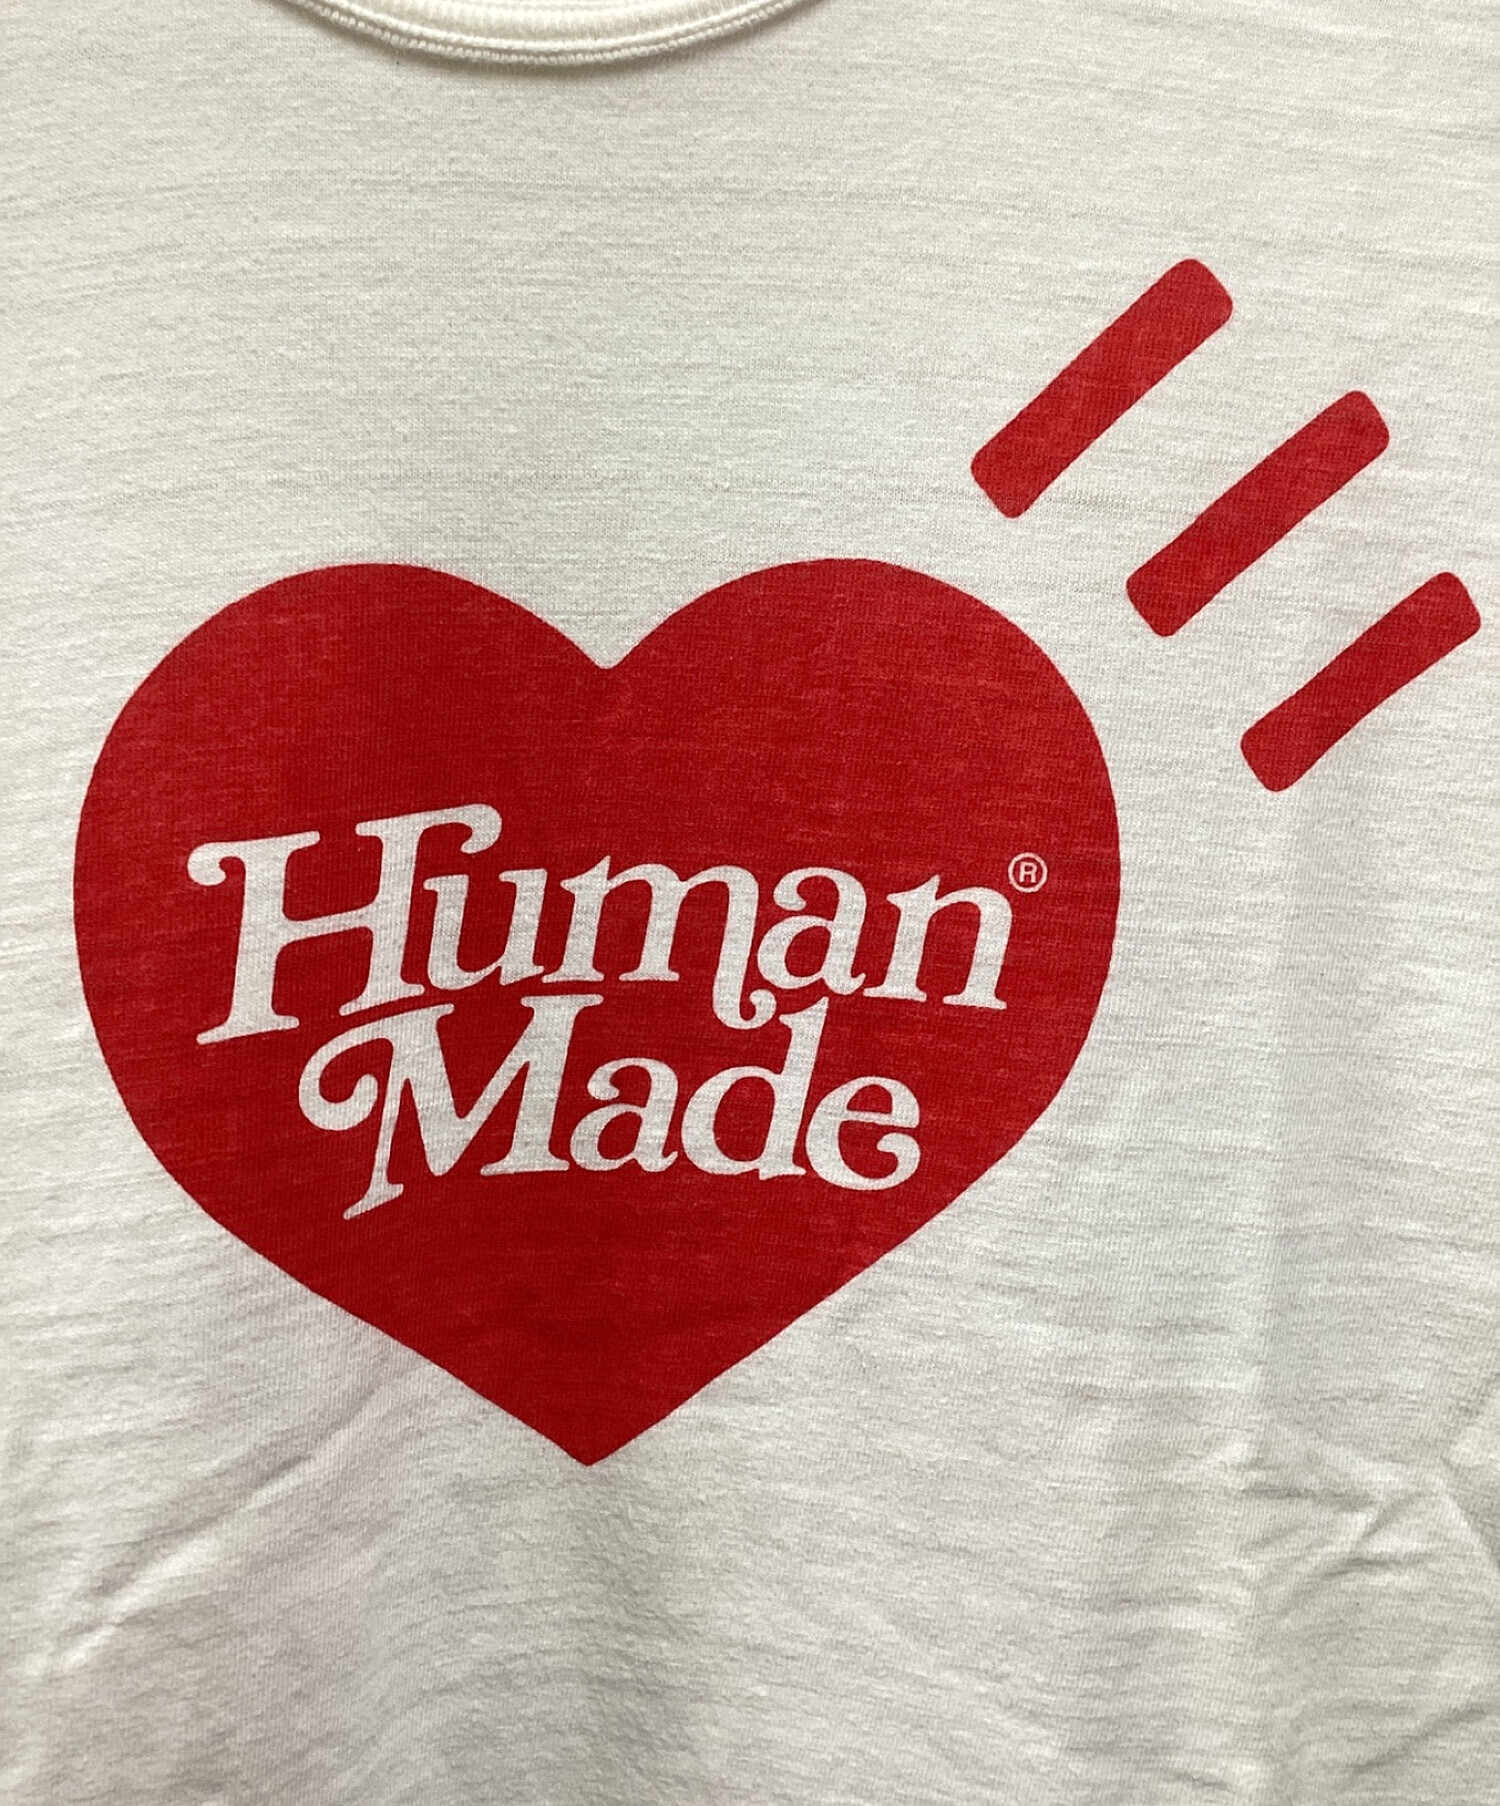 HUMANMADE girls don'tcry プリントtシャツ